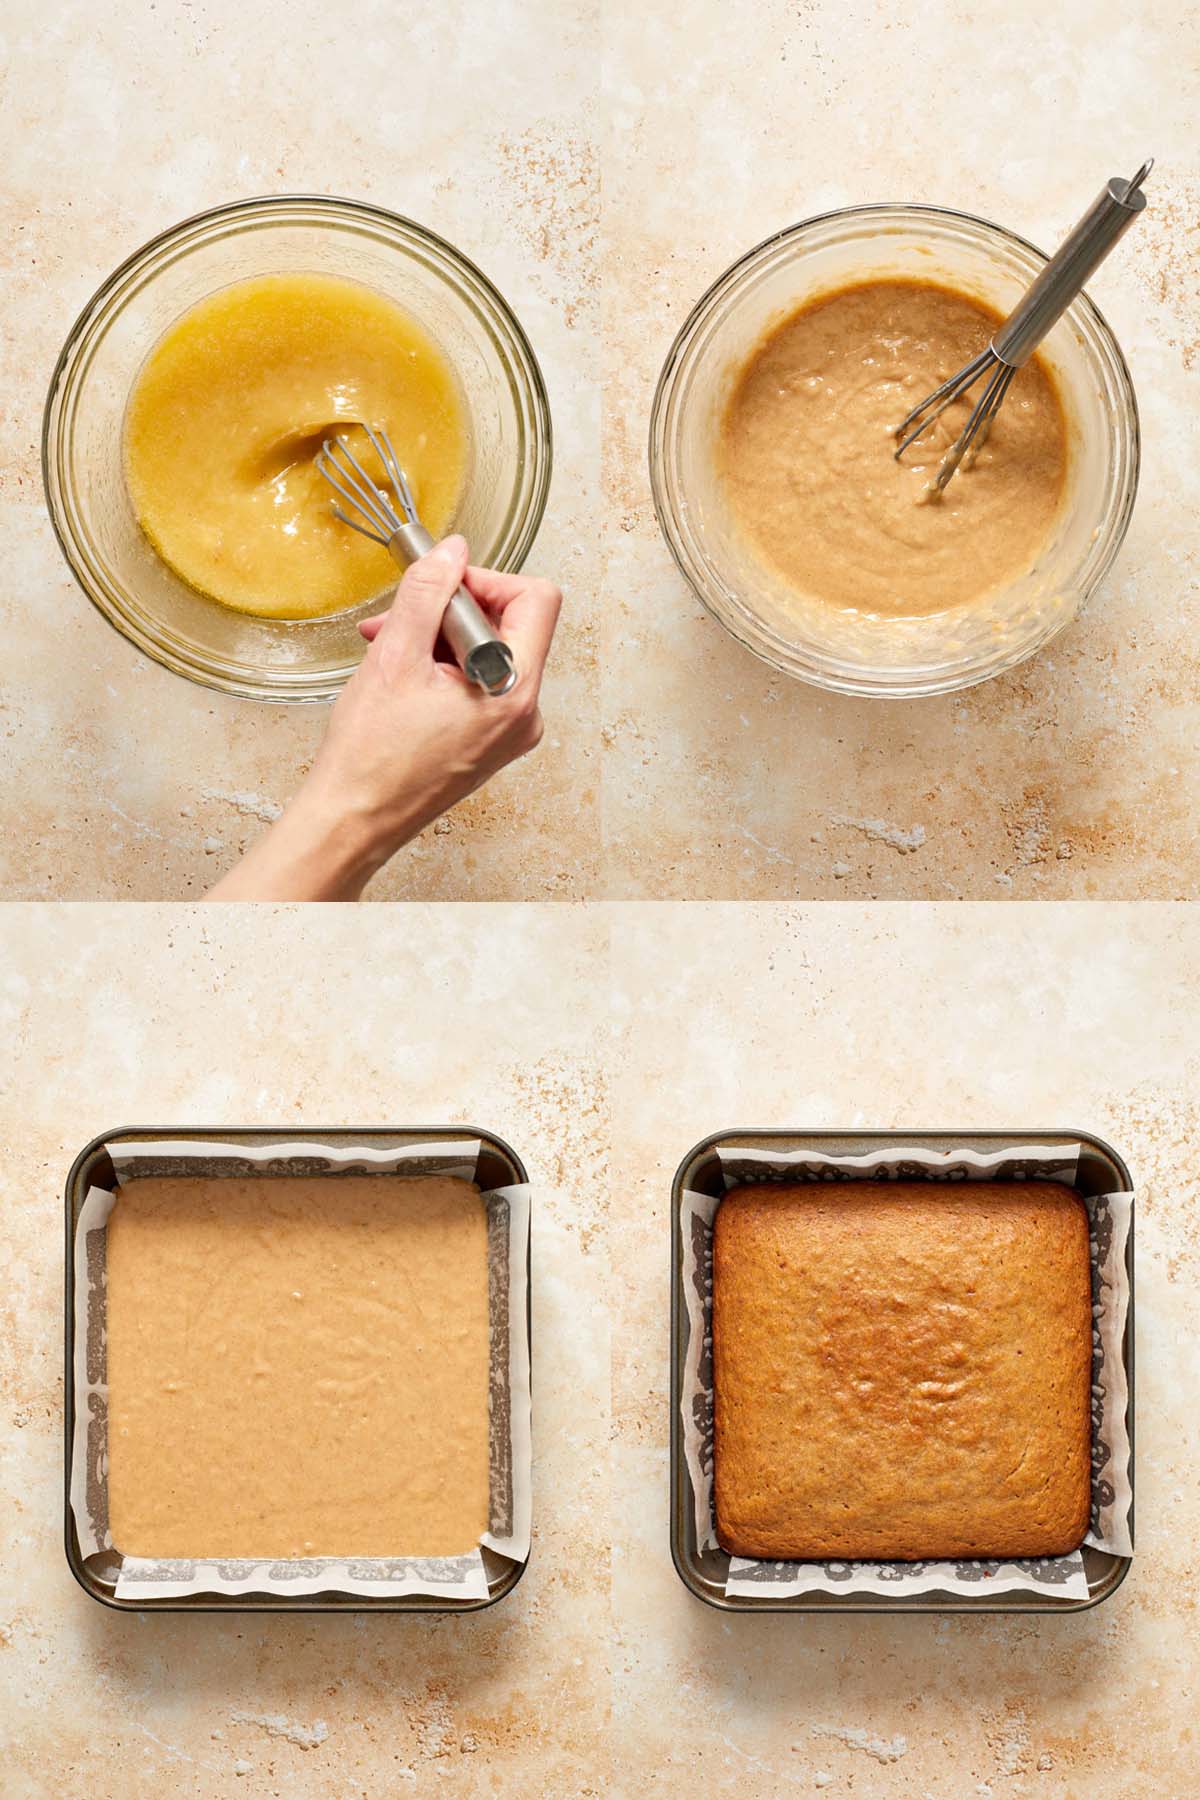 Collage of 4 images showing how the banana cake with oil is made.